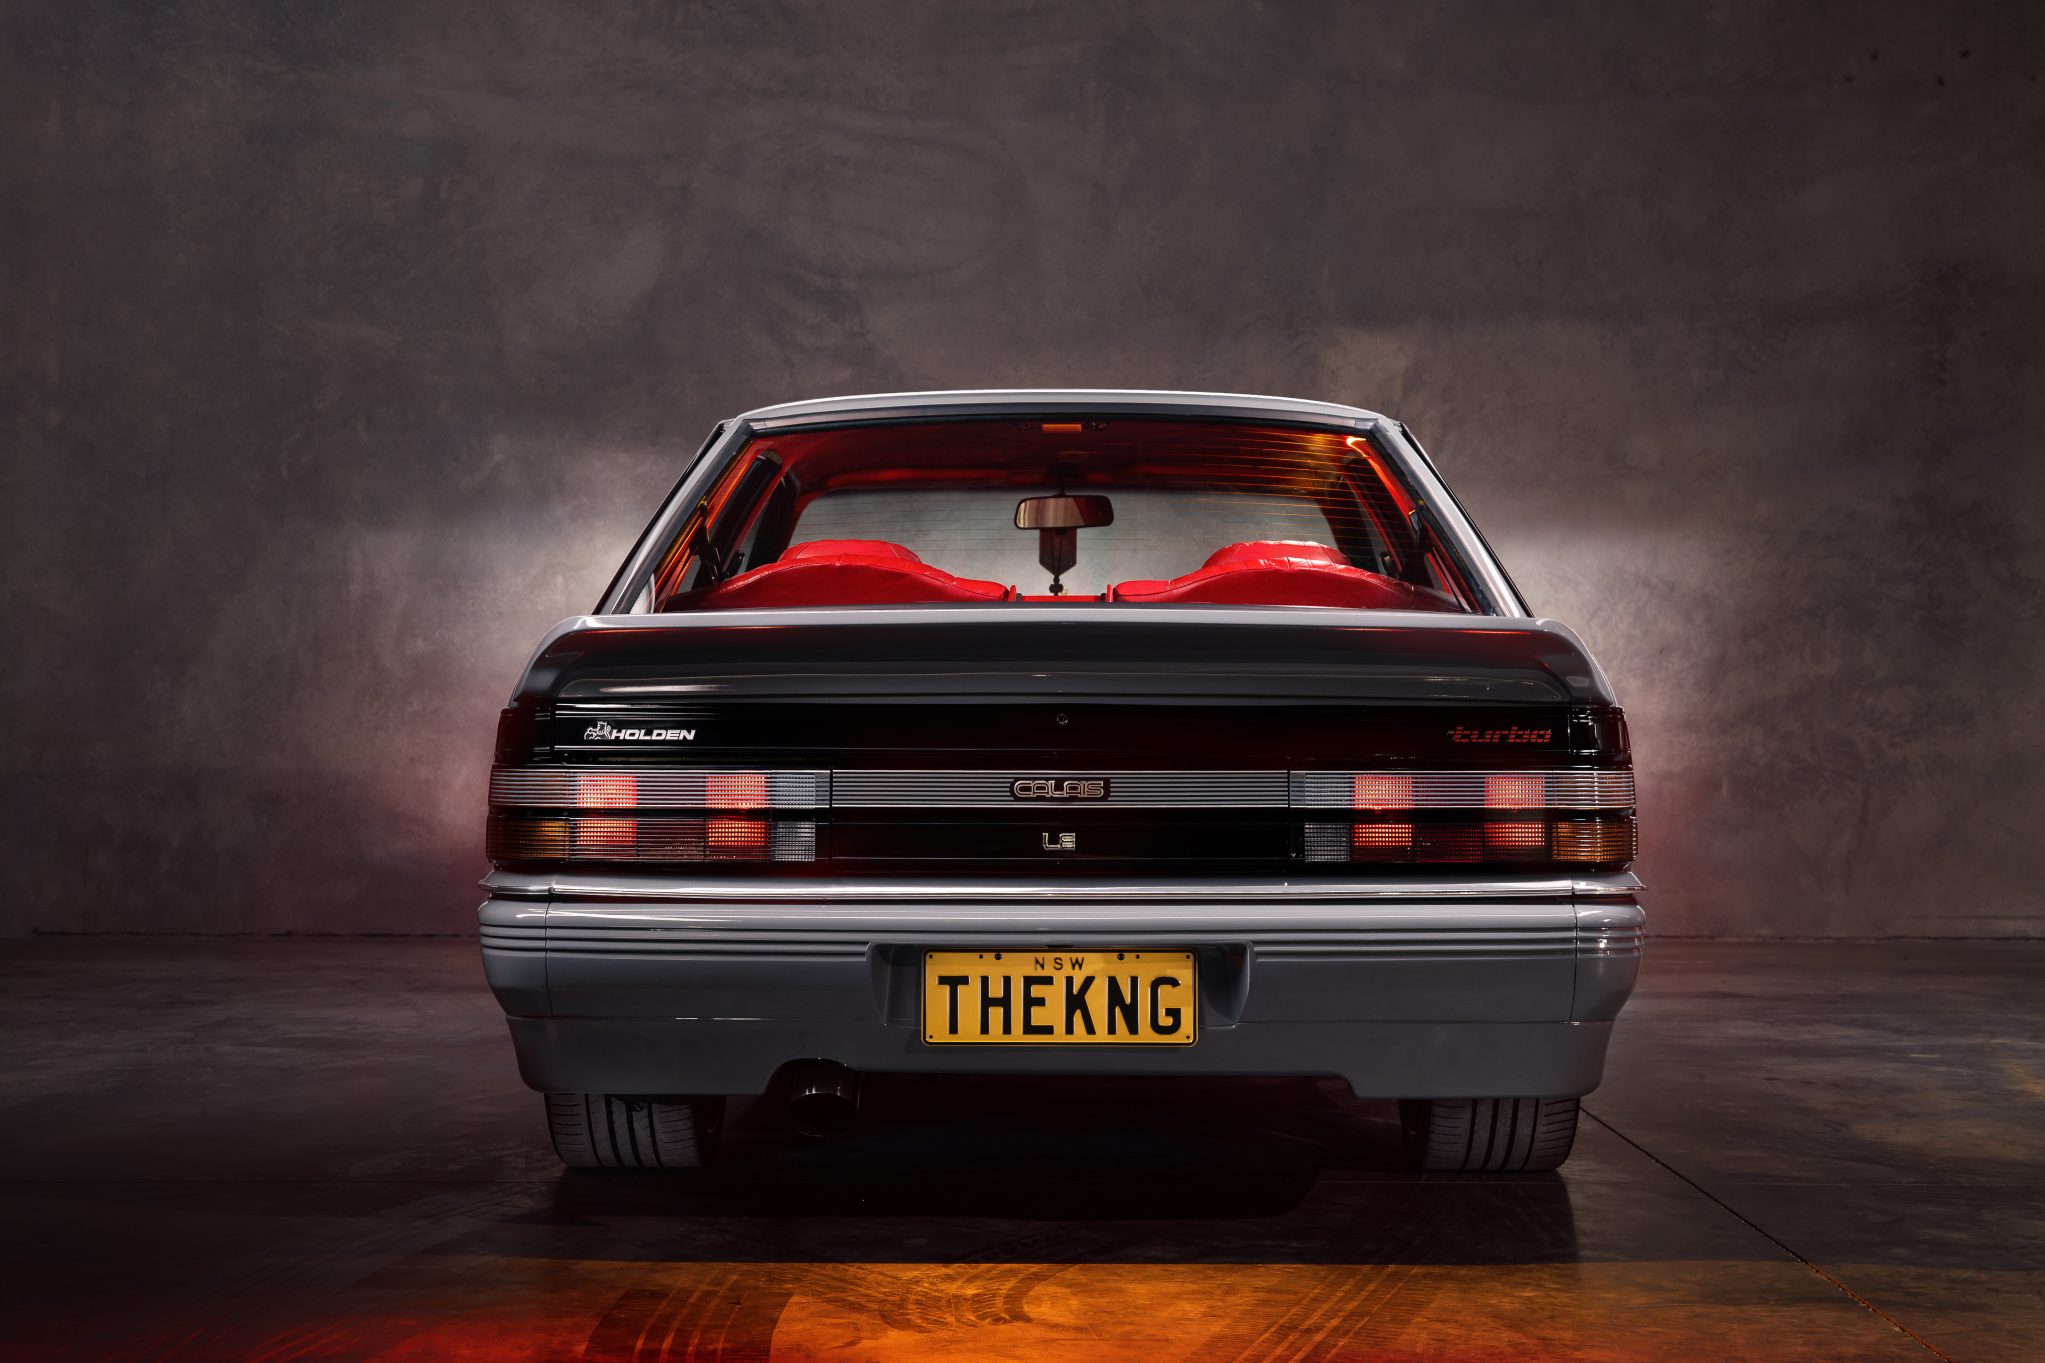 Street Machine Features Stefan Tomevski Vl Commodore Thekng Rear